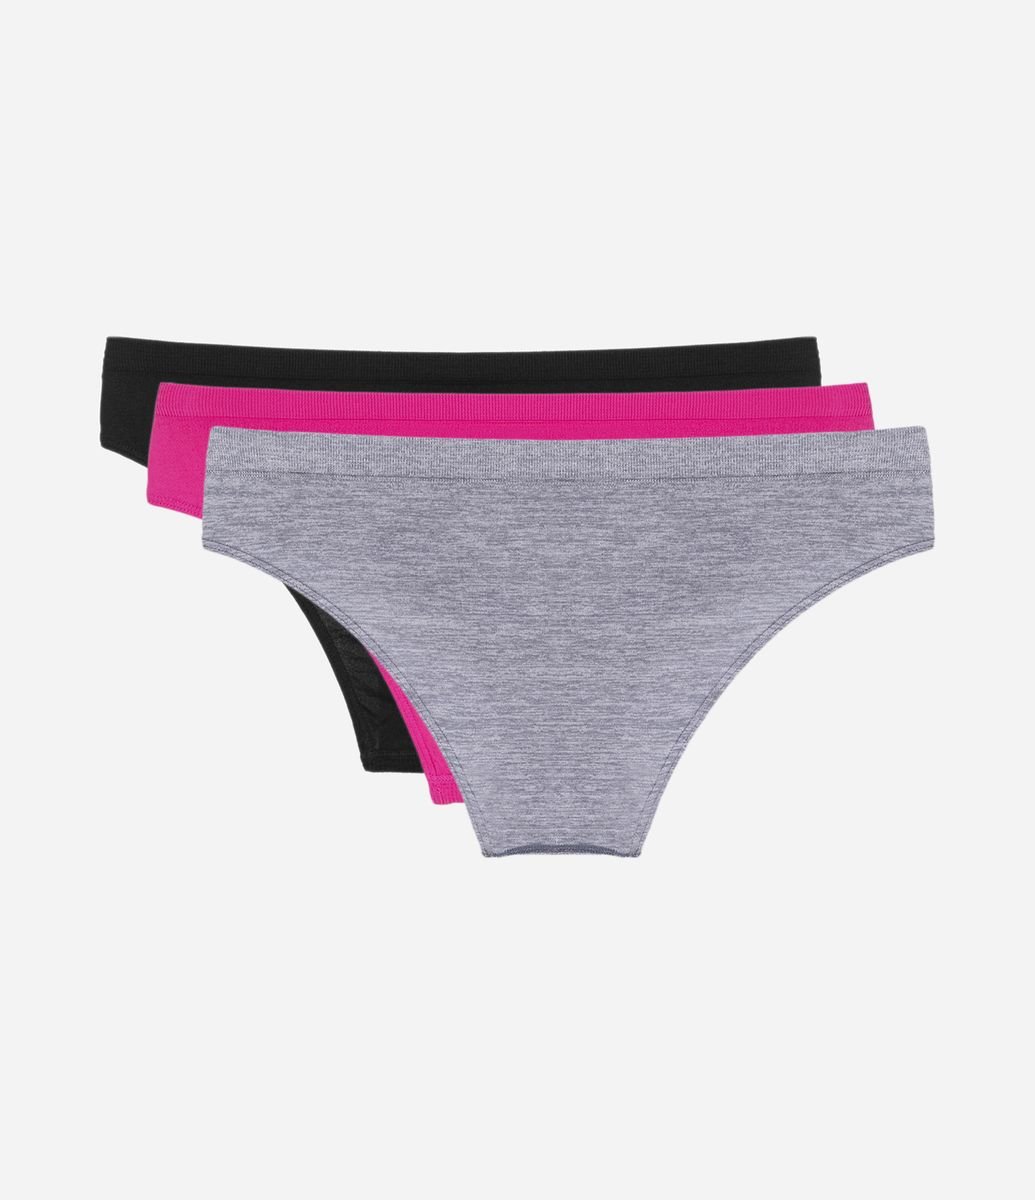 Cotton Plain Womens Underwear, Size: Small, Medium, Large at Rs 45